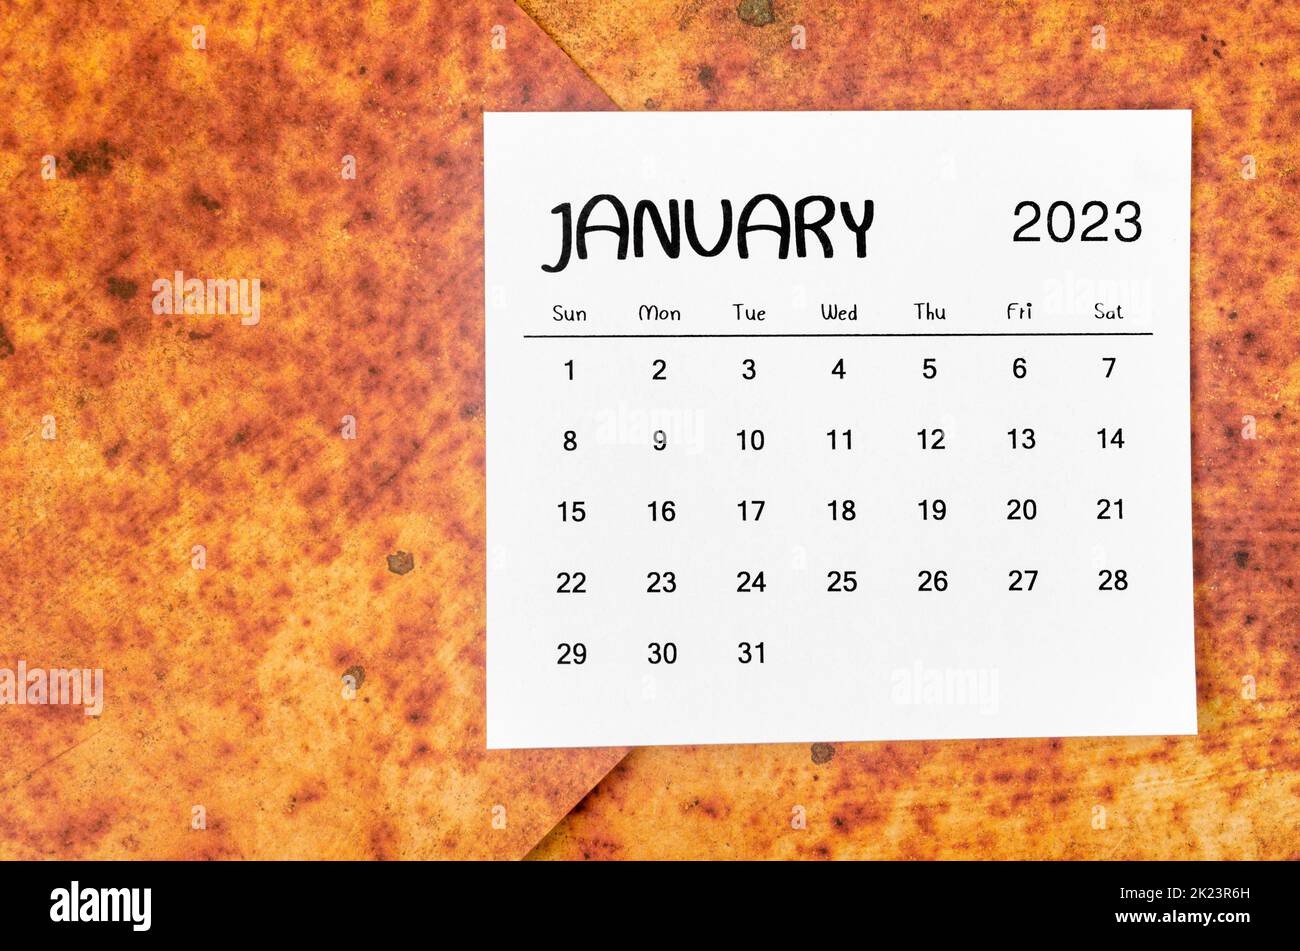 January 2023 Monthly calendar for 2023 year on red grunge background. Stock Photo